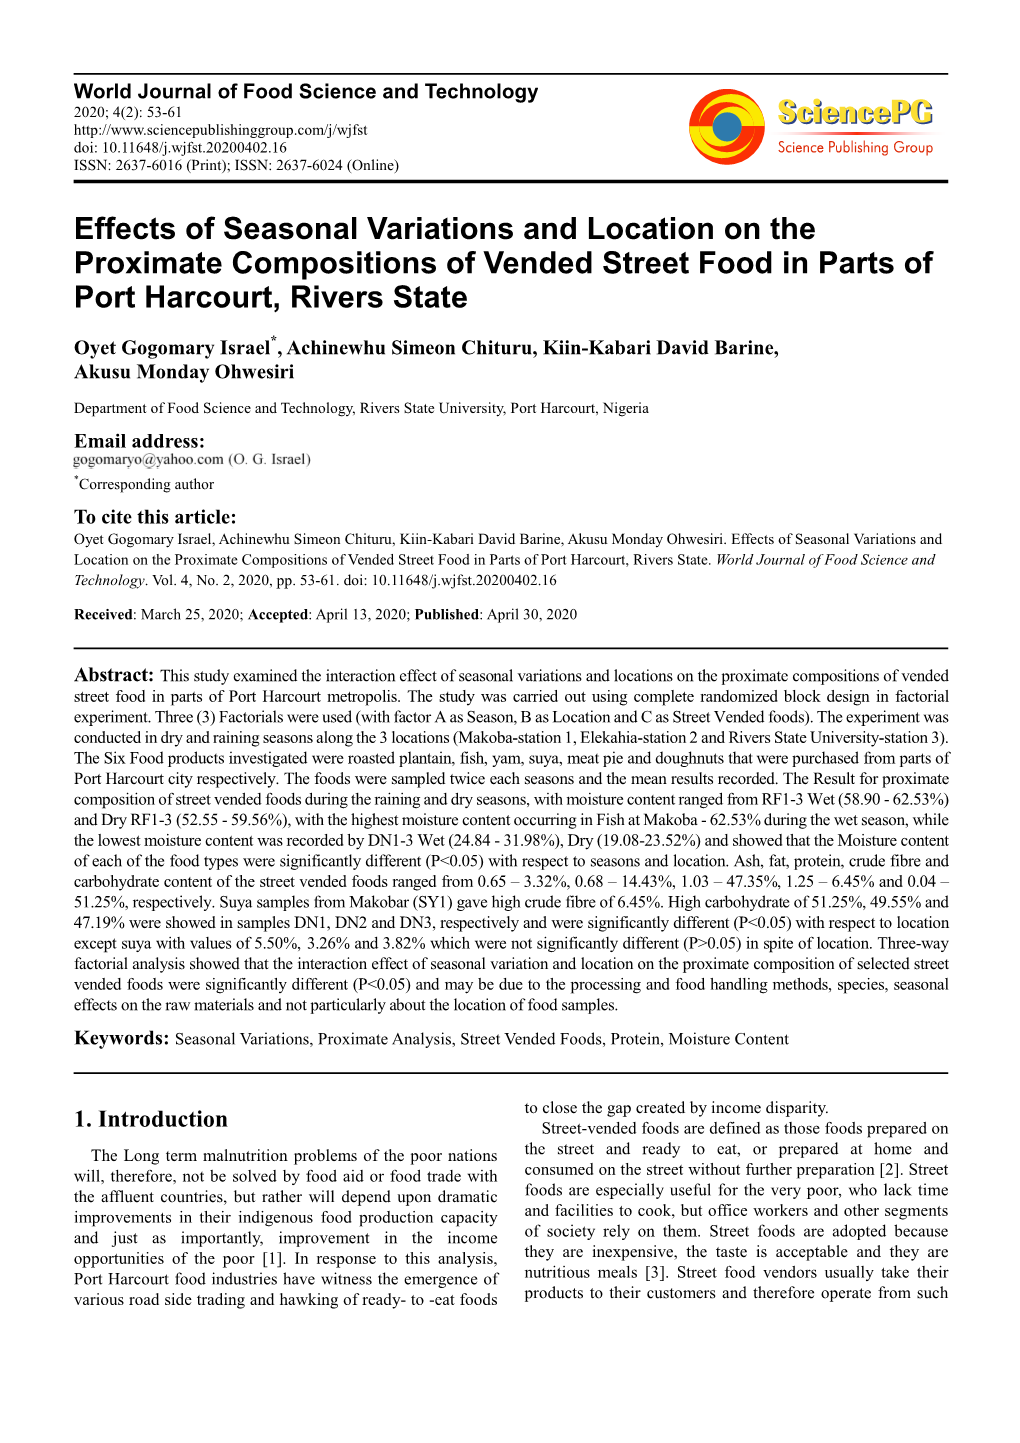 Effects of Seasonal Variations and Location on the Proximate Compositions of Vended Street Food in Parts of Port Harcourt, Rivers State